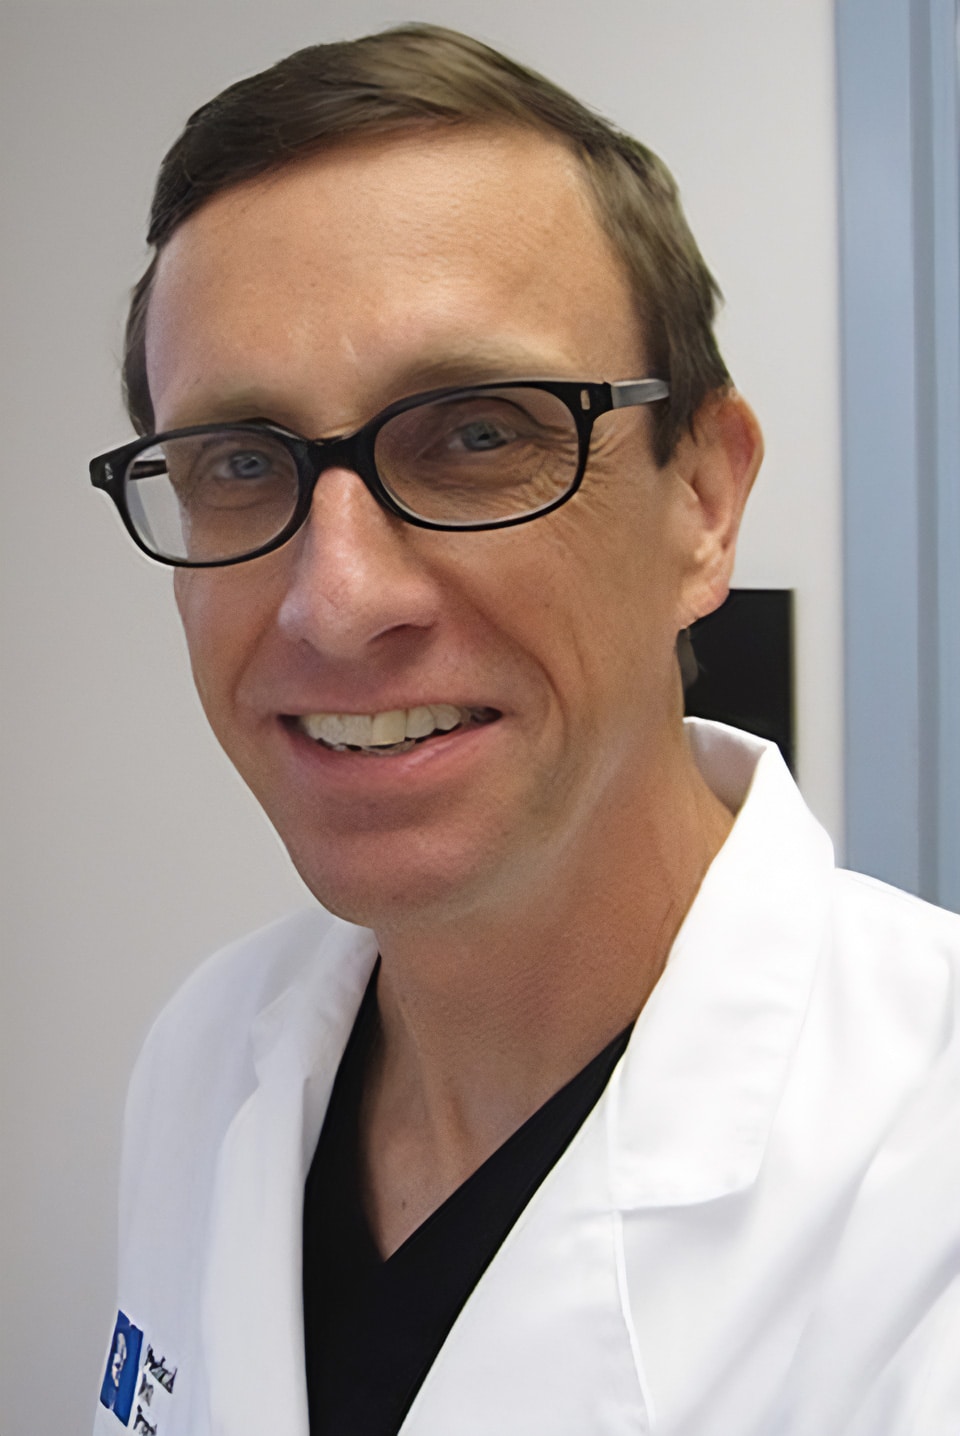 A man wearing glasses and white lab coat.